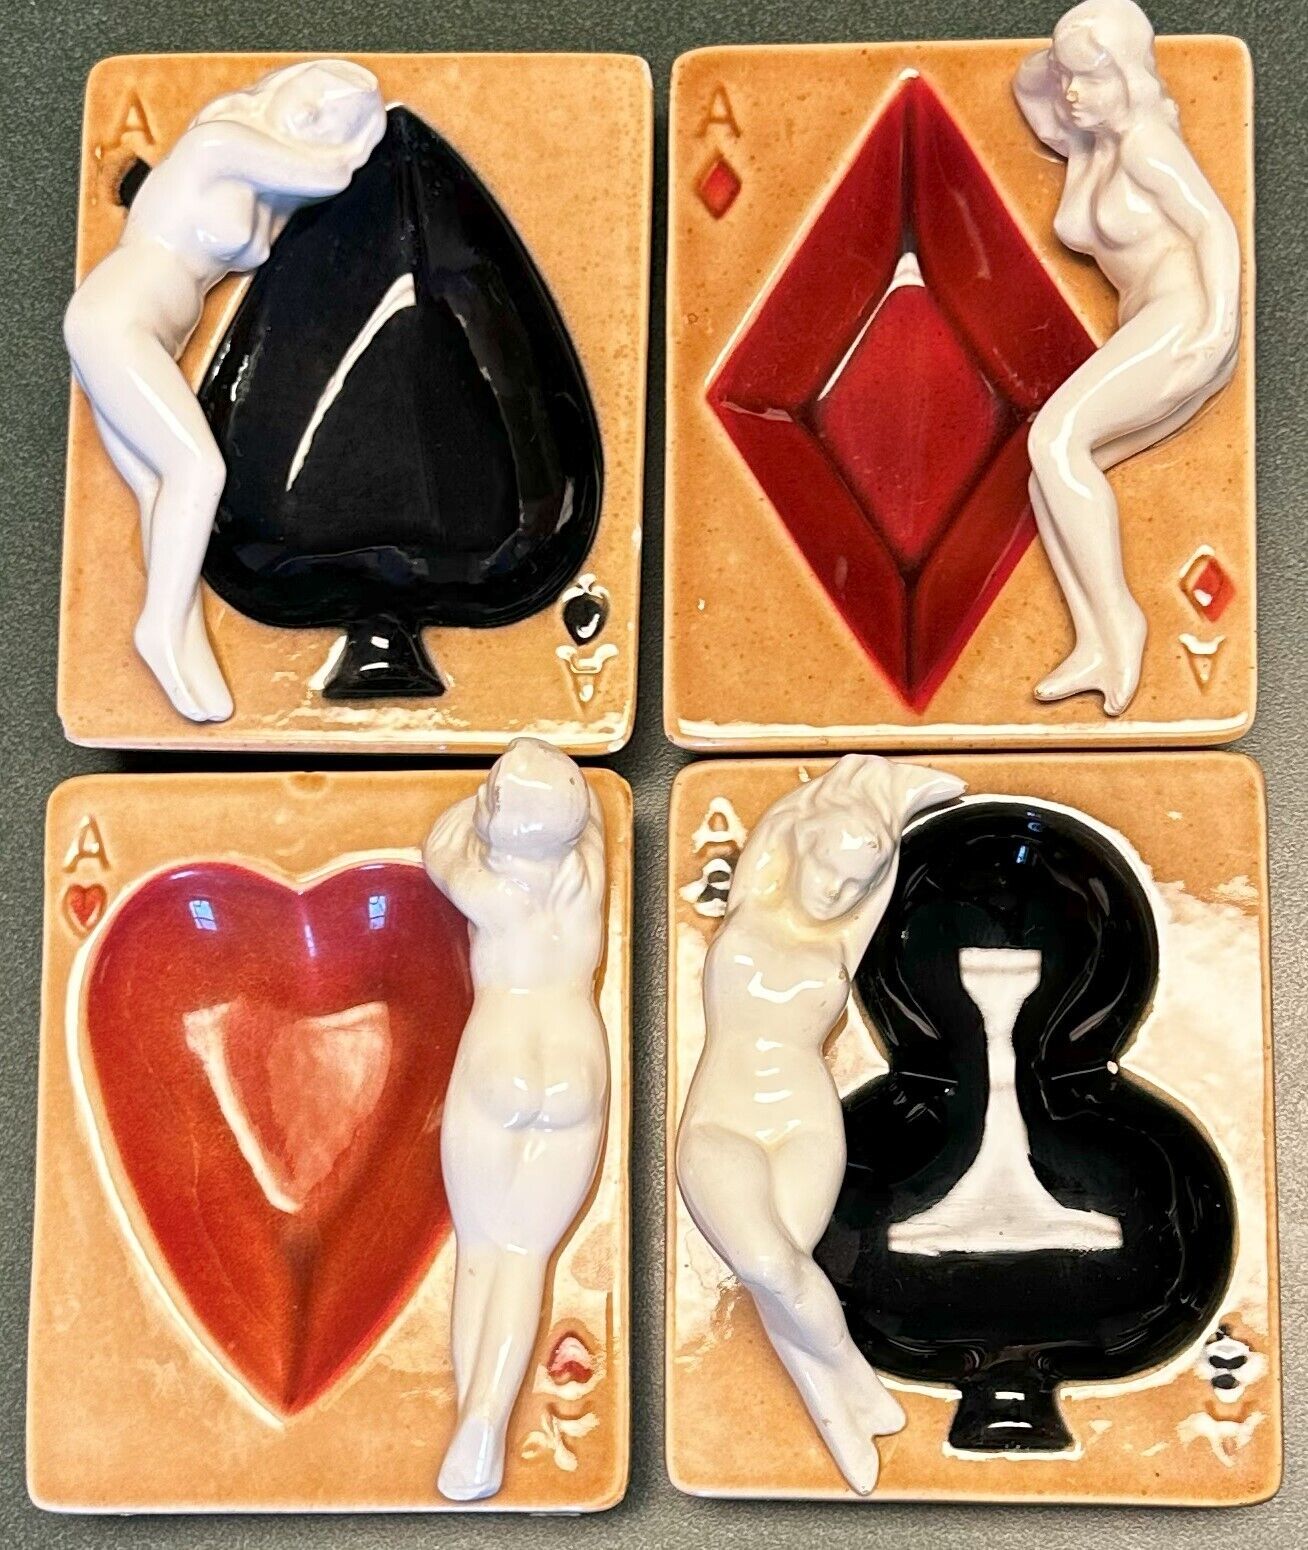 Vintage Shafford Risque Playing Card Ashtrays Circa 1940s Set of 4 - Very Nice